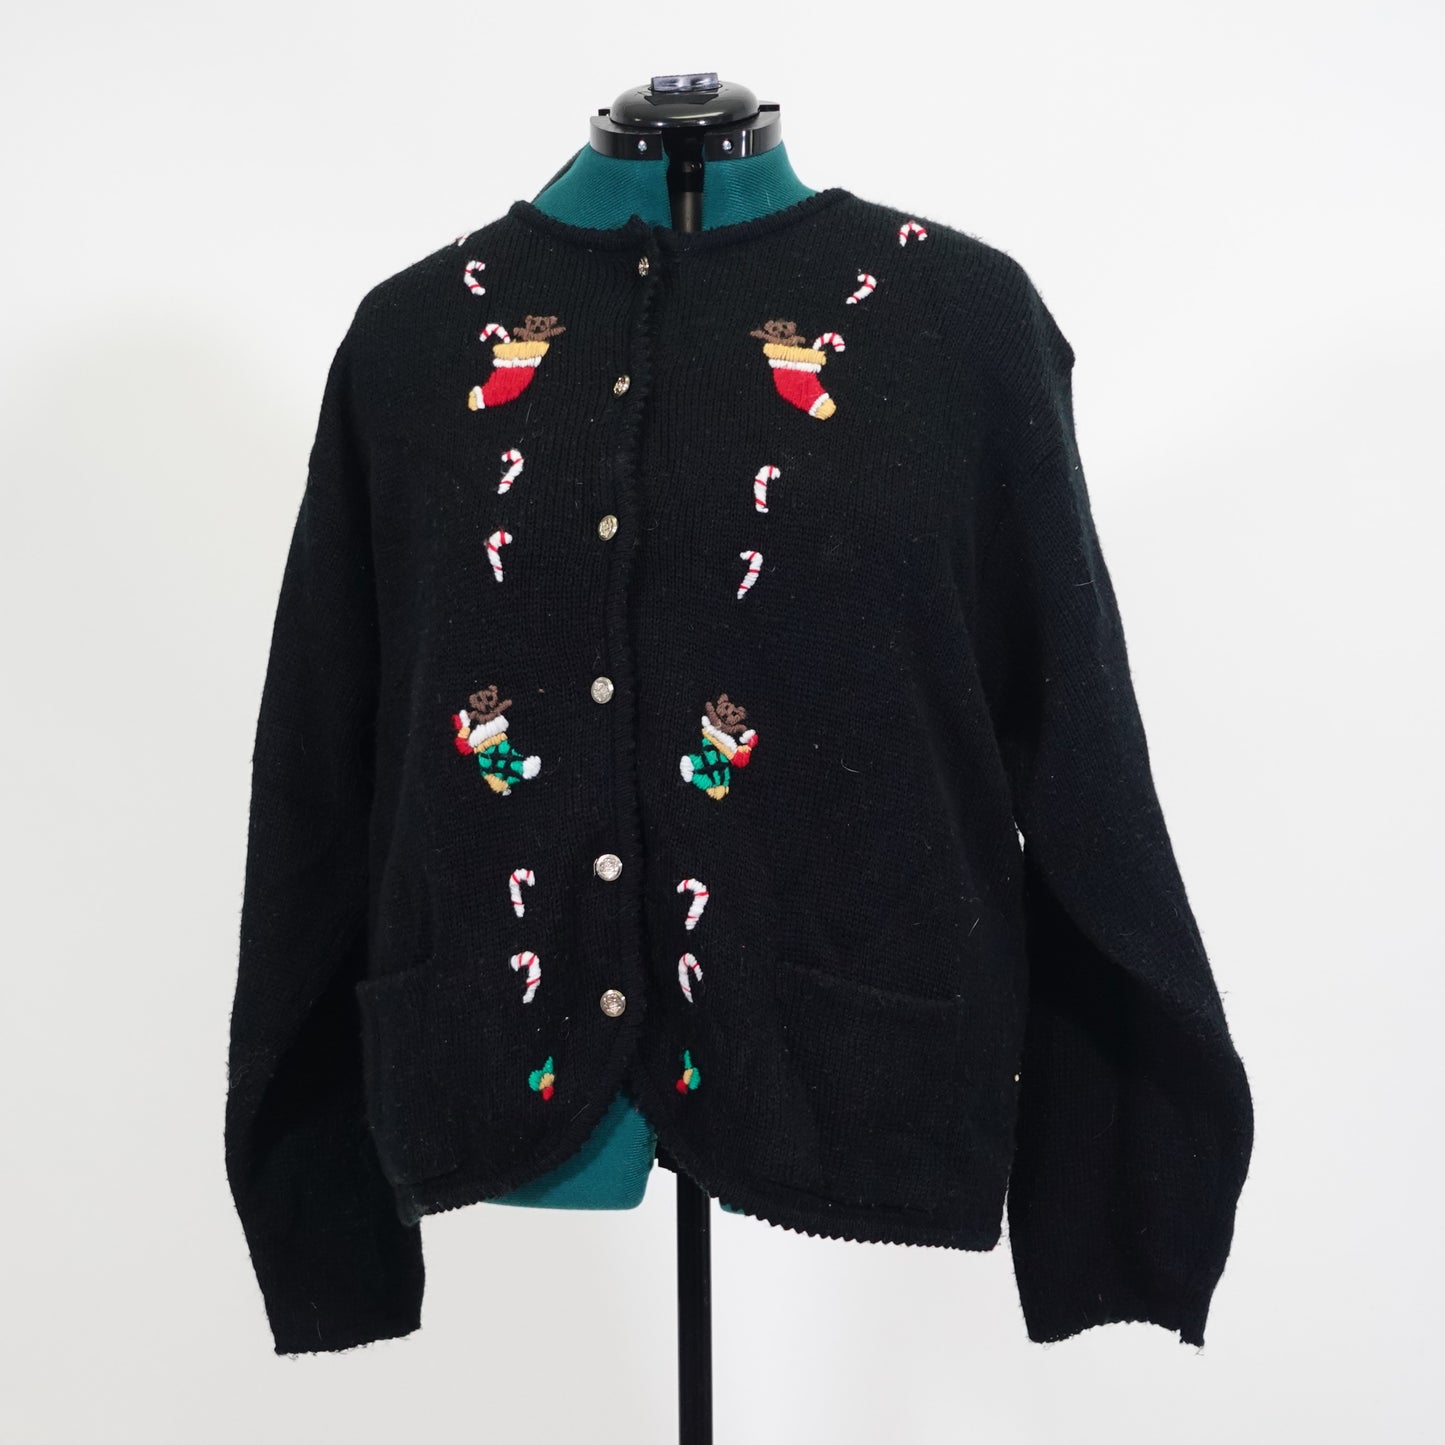 Vintage Black Cardigan with Embroidered Christmas Design